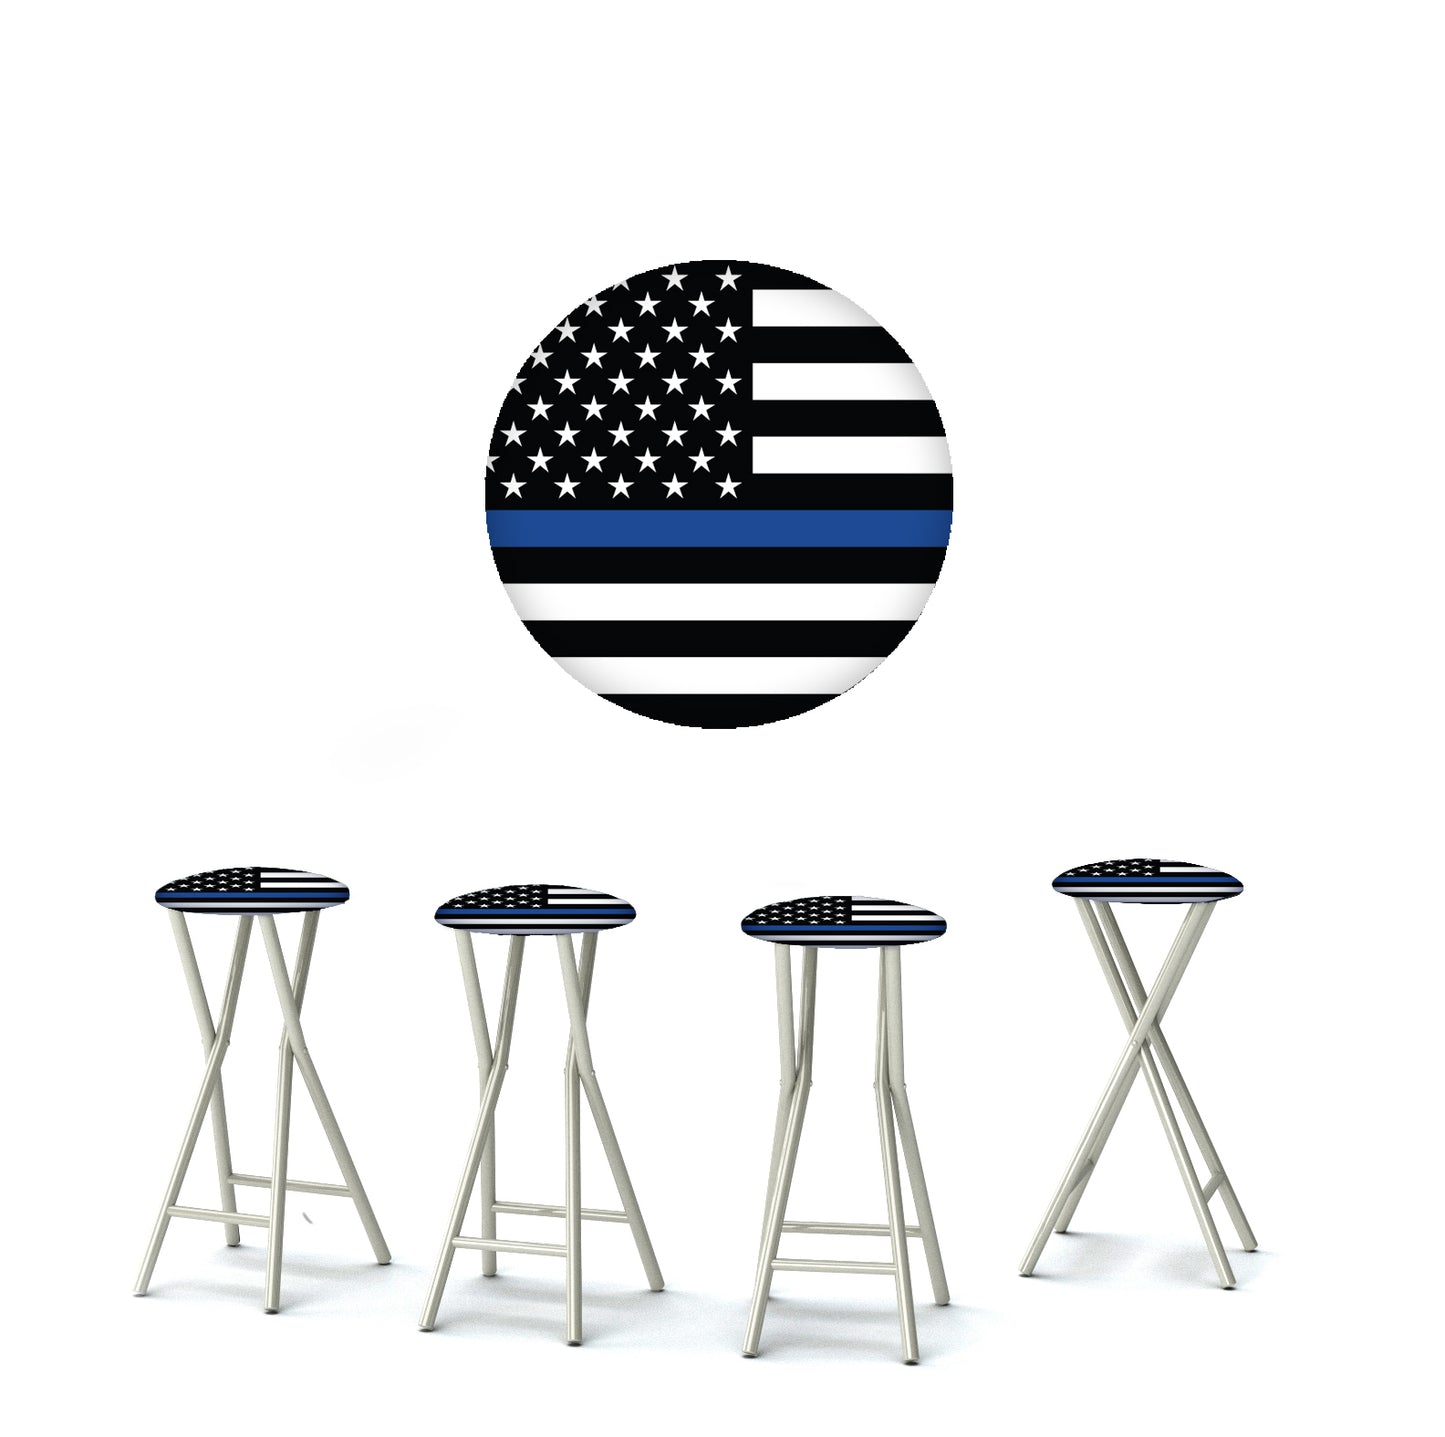 American for Police